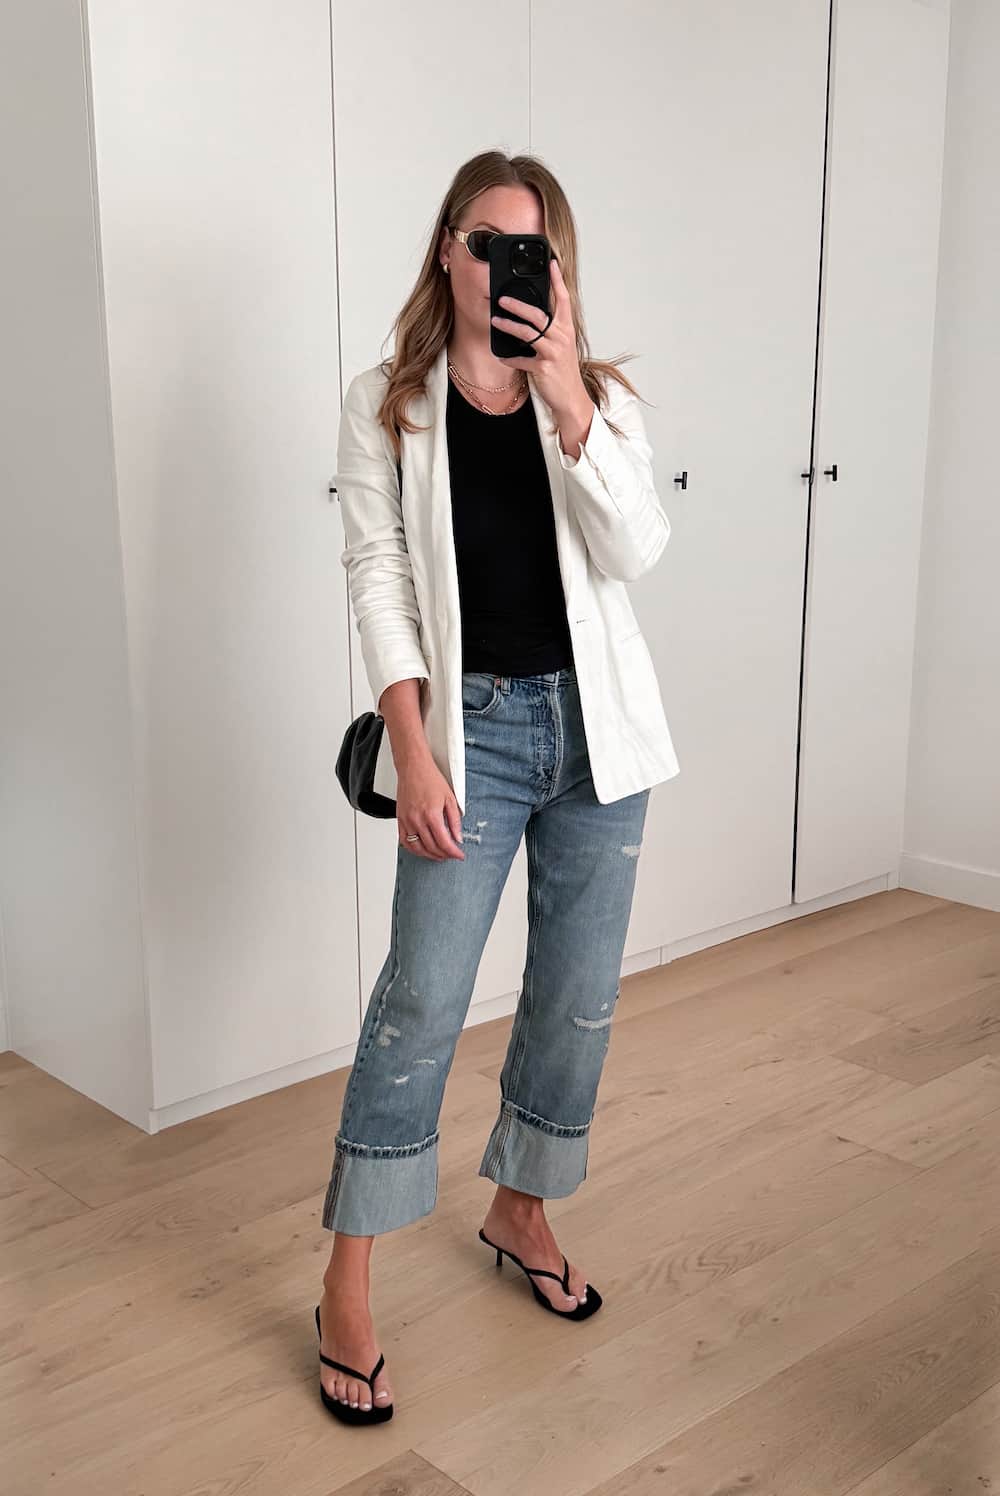 Christal wearing jeans, black heeled sandals, a white blazer and a black knit top.